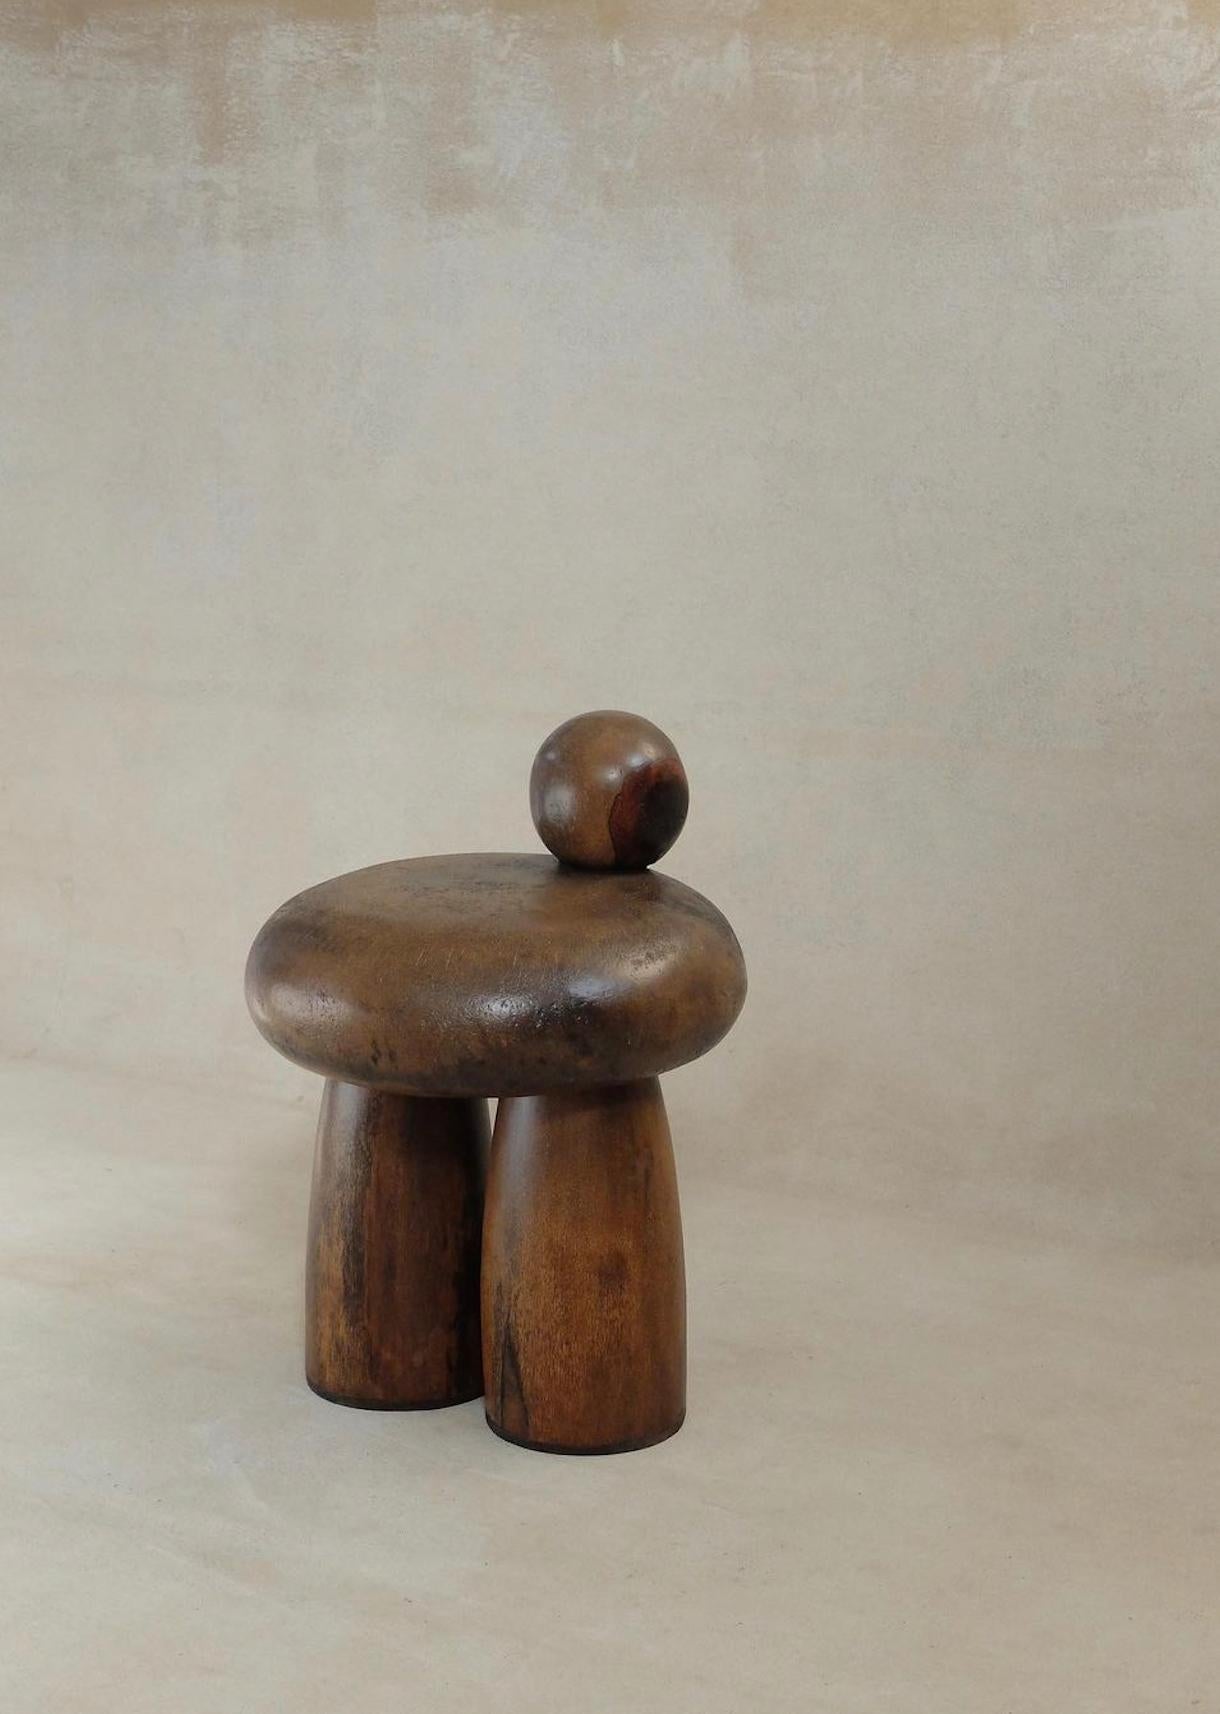 Seat made by hand, designed and produced in Tunisia.
The Petite Ourse handcarved palmwood seat features an elementary yet captivating design, featuring rounded shapes that highlight the natural grain of the wood. The spherical backrest adds balance